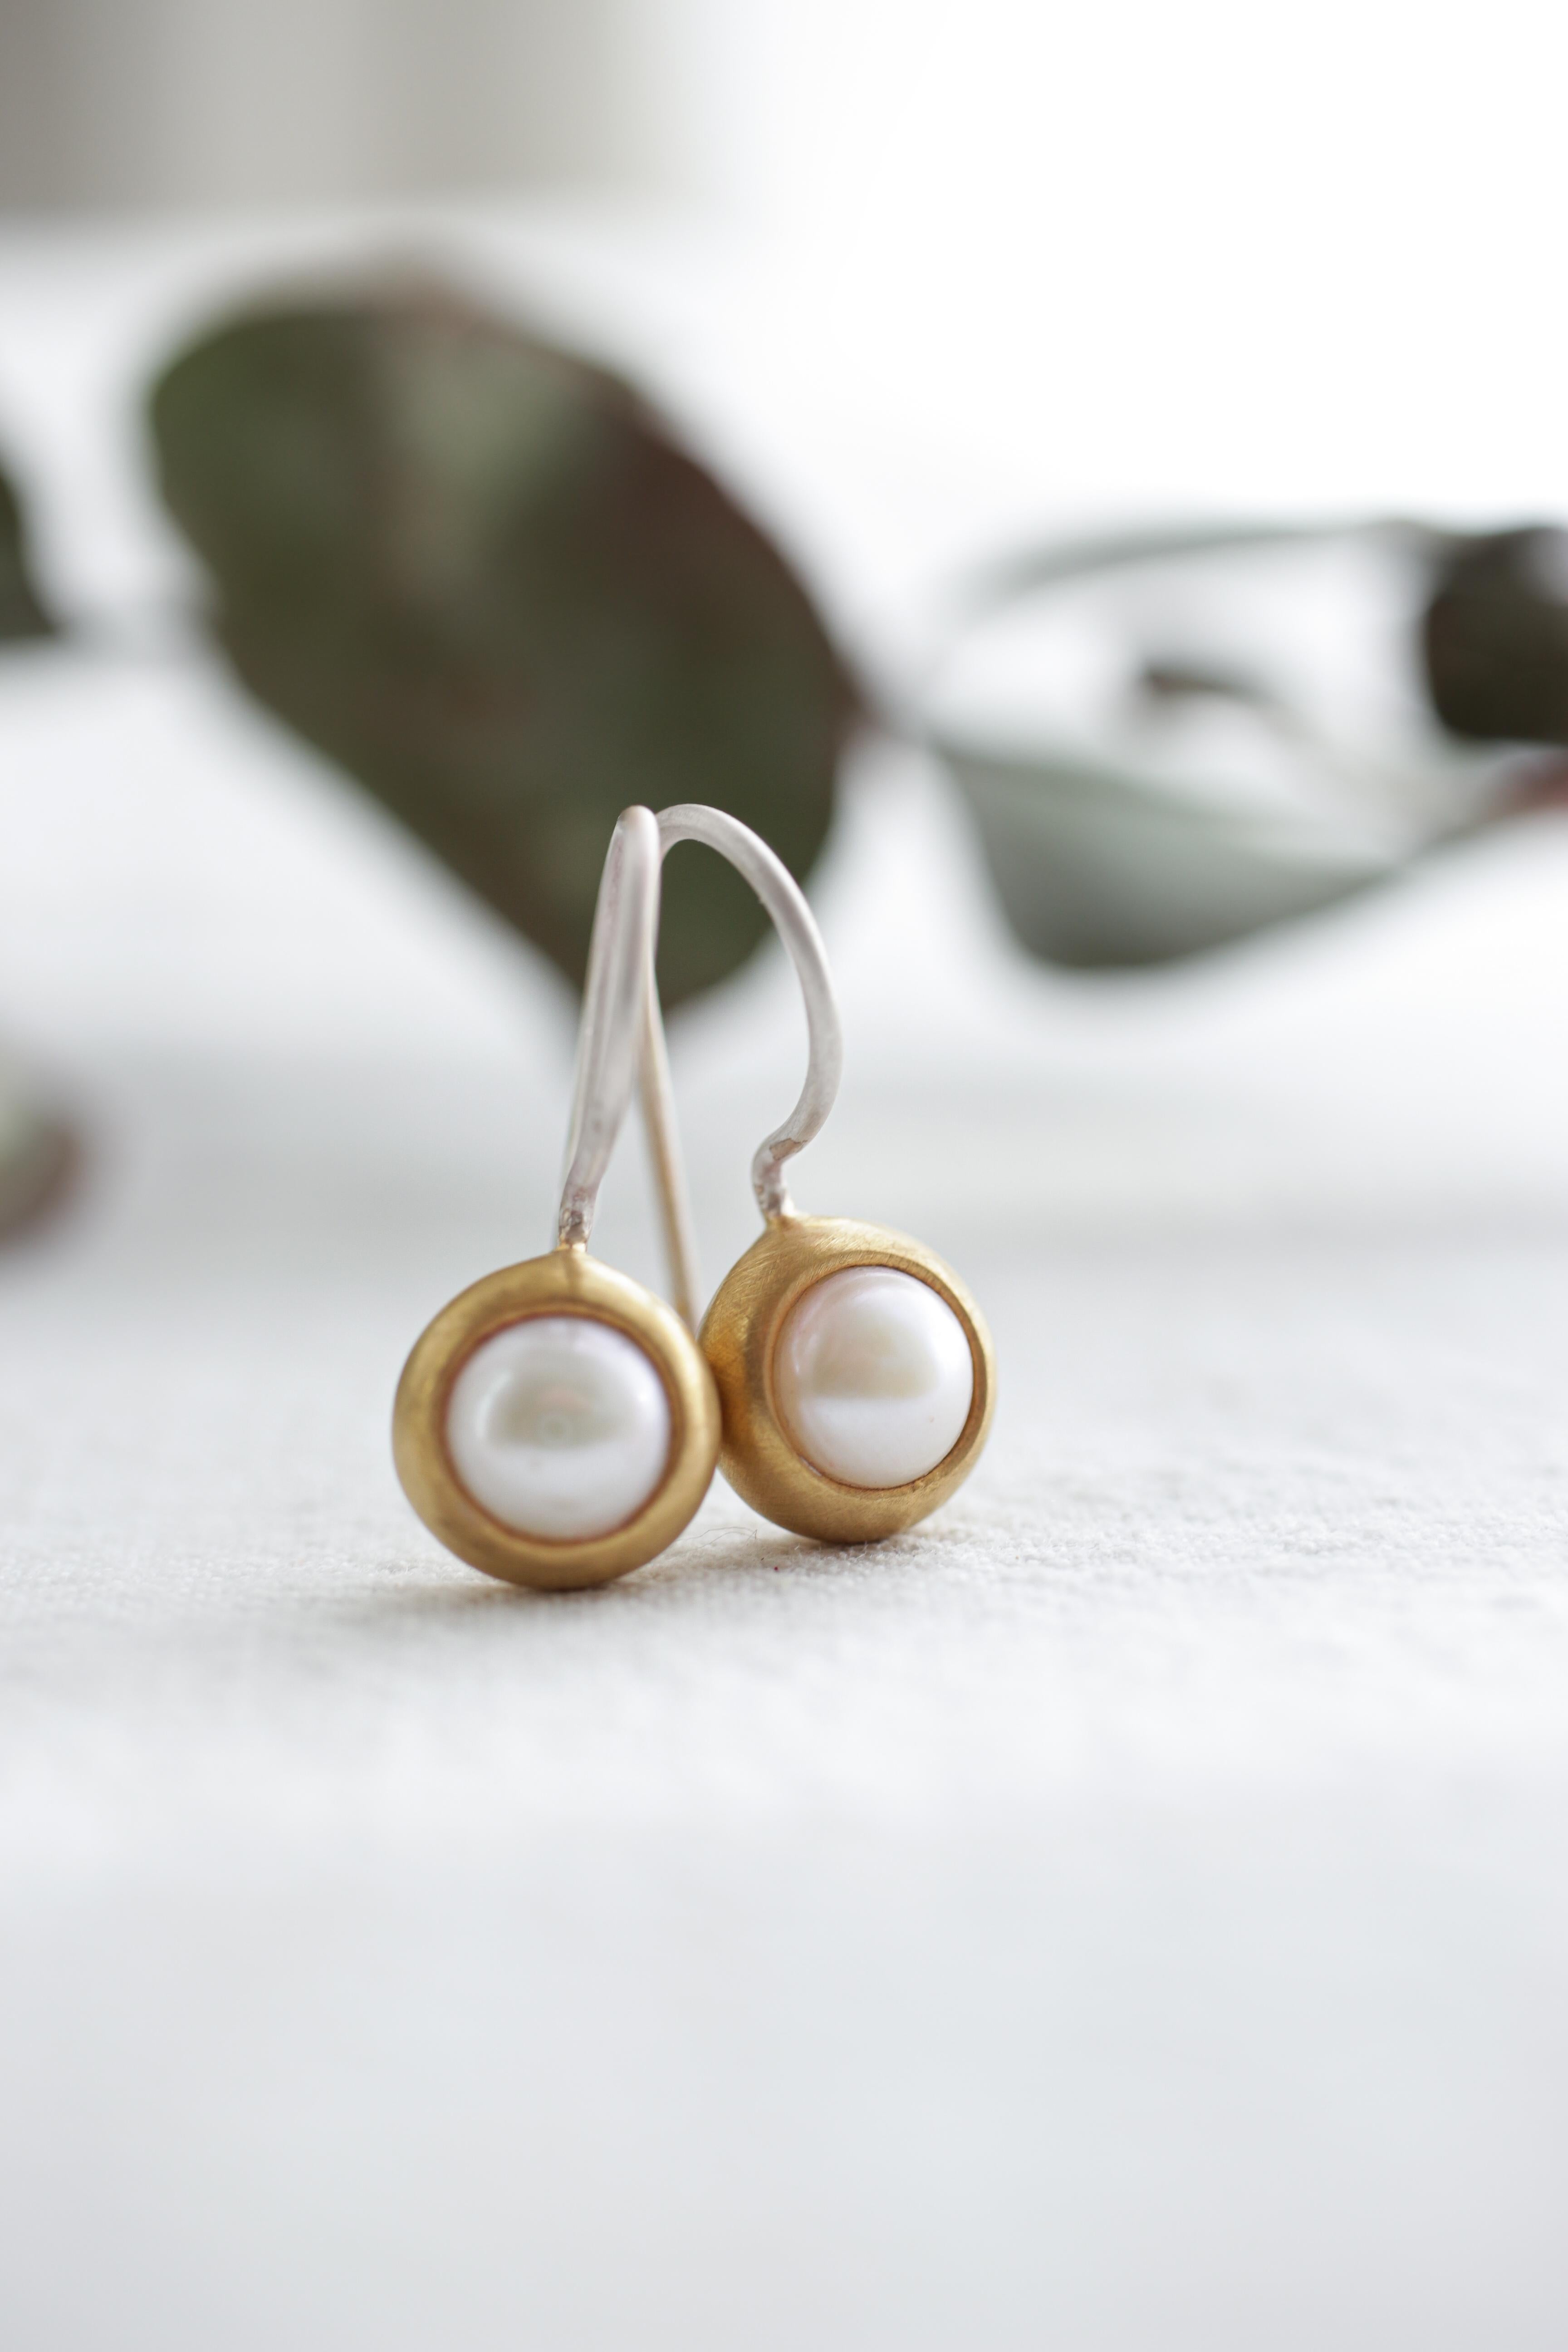 The gold plated Pearl Earrings made from Sterling Silver are part of the Pearl Classics and symbolize the natural beauty and high quality designs of Monika Herré.

 

The curved earring splint smoothly glides around the ear and is worked into the